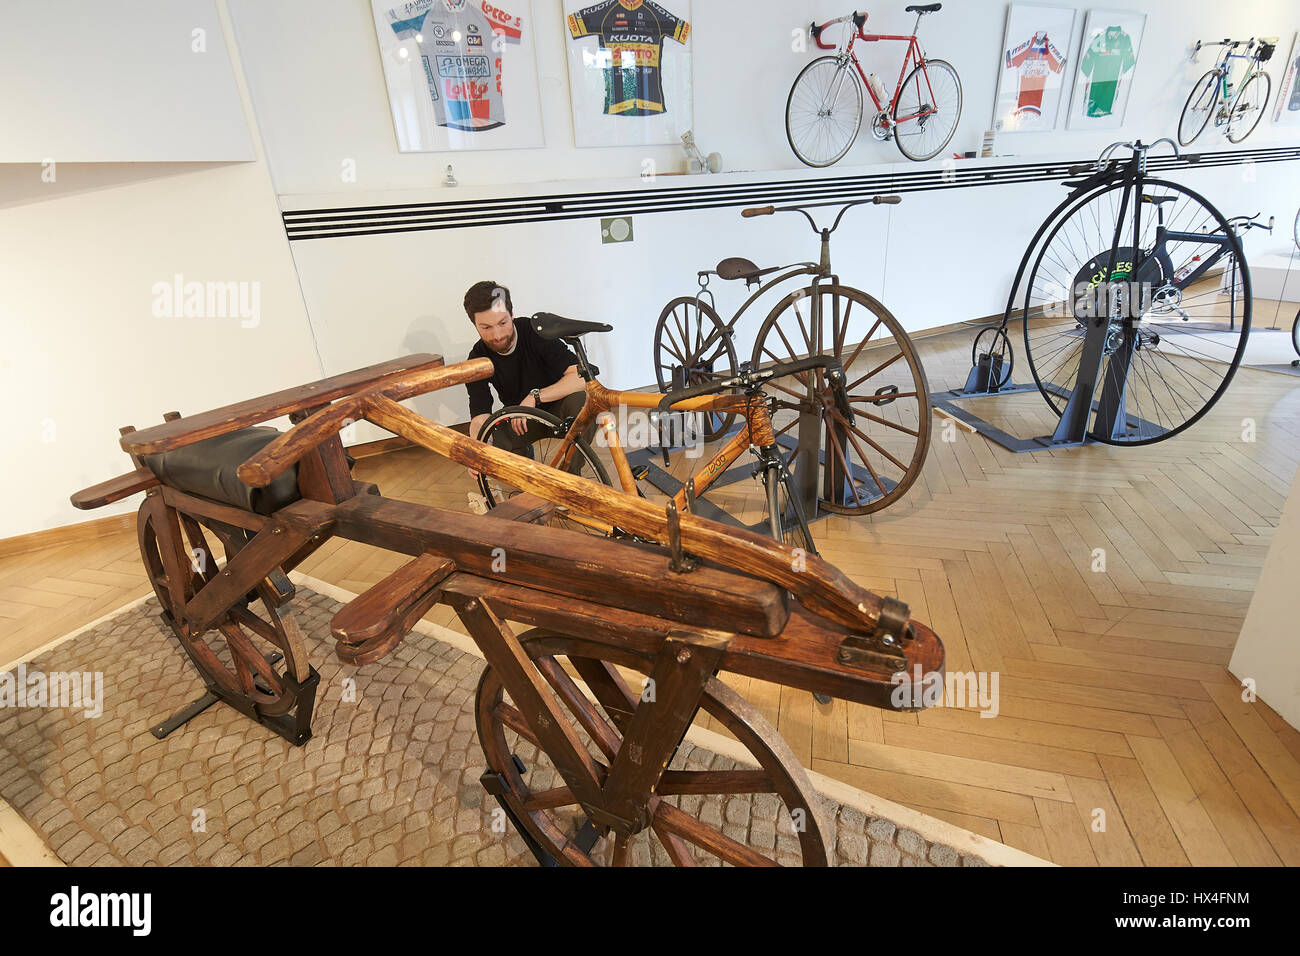 Koblenz, Germany. 20th Mar, 2017. A racing bicycle made from bamboo stands behind to a replica of a wooden walking machine by Karl Freiherr von Drais (Karl Baron of Drais, 1785-1851) from 1817, which marked the dawn of a new era, in the exhibition 'Das Fahrrad - 200 Jahre Handwerk auf Raedern' (lit. The bicycle - 200 years of handicraft on wheels) in Koblenz, Germany, 20 March 2017. The special exhibition marking the 200th birthday of the bicycle will feature some 45 bikes until 07 April. Photo: Thomas Frey/dpa/Alamy Live News Stock Photo